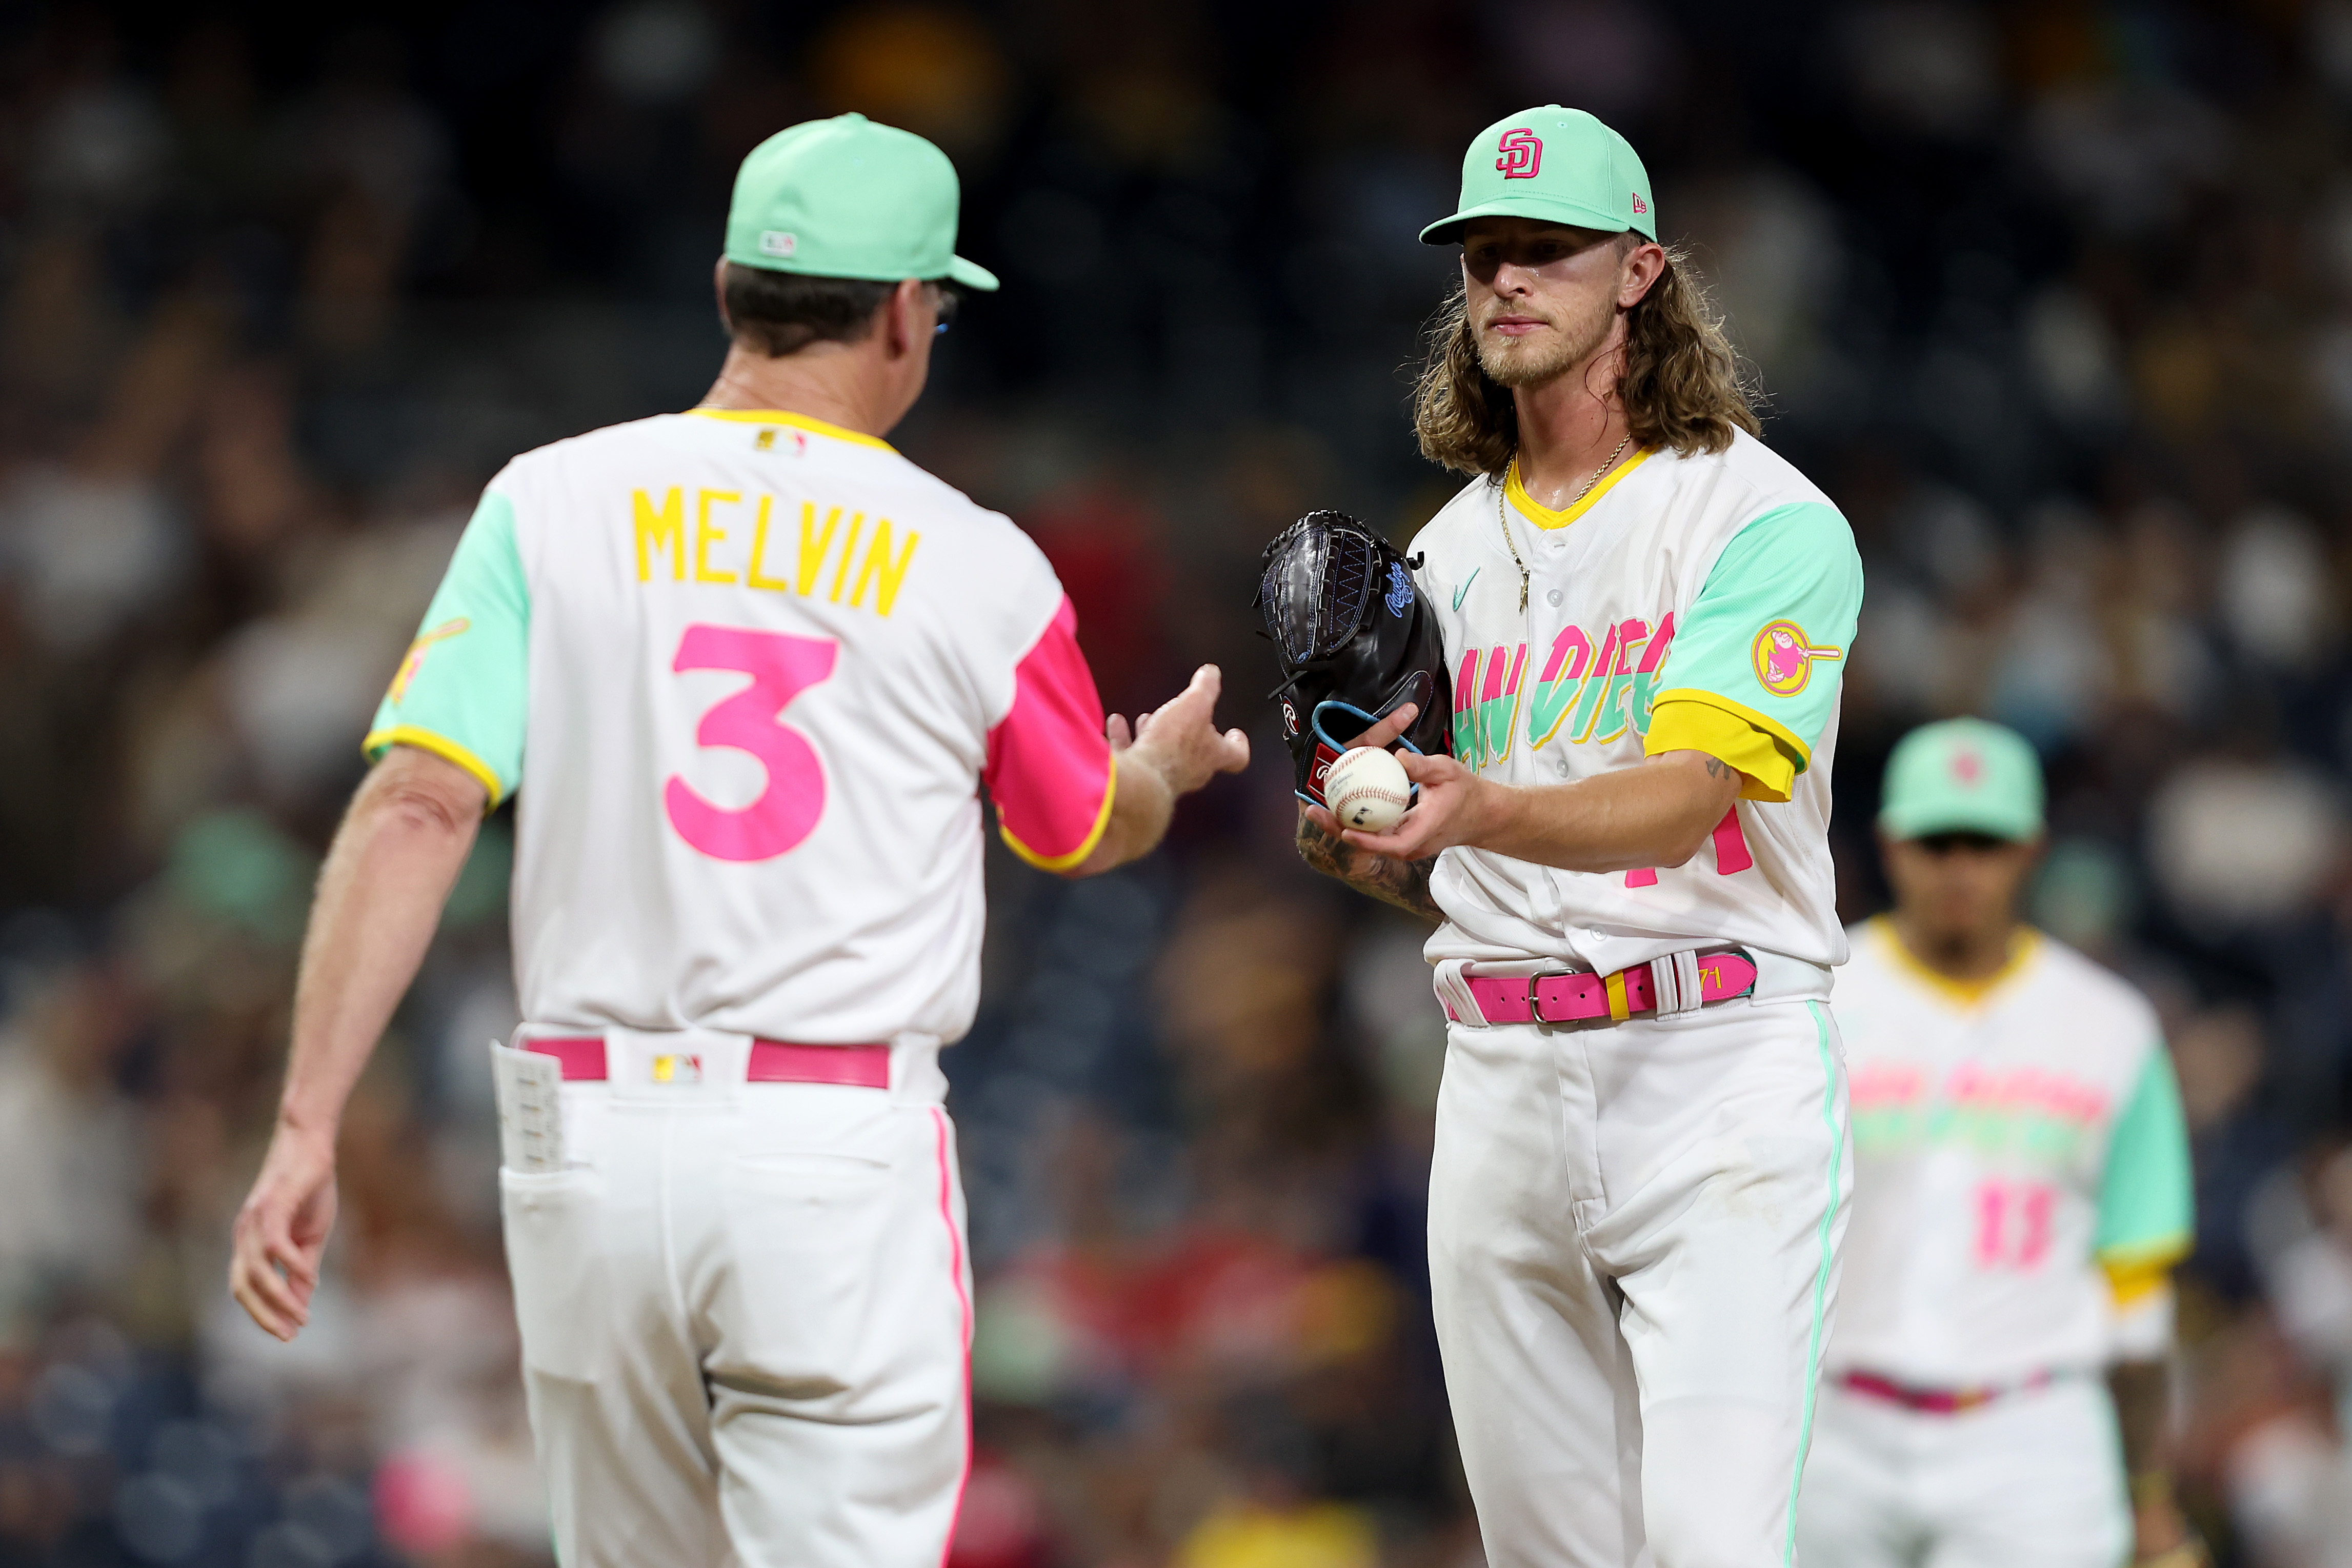 Josh Hader has Been a Nuclear Disaster for the Padres